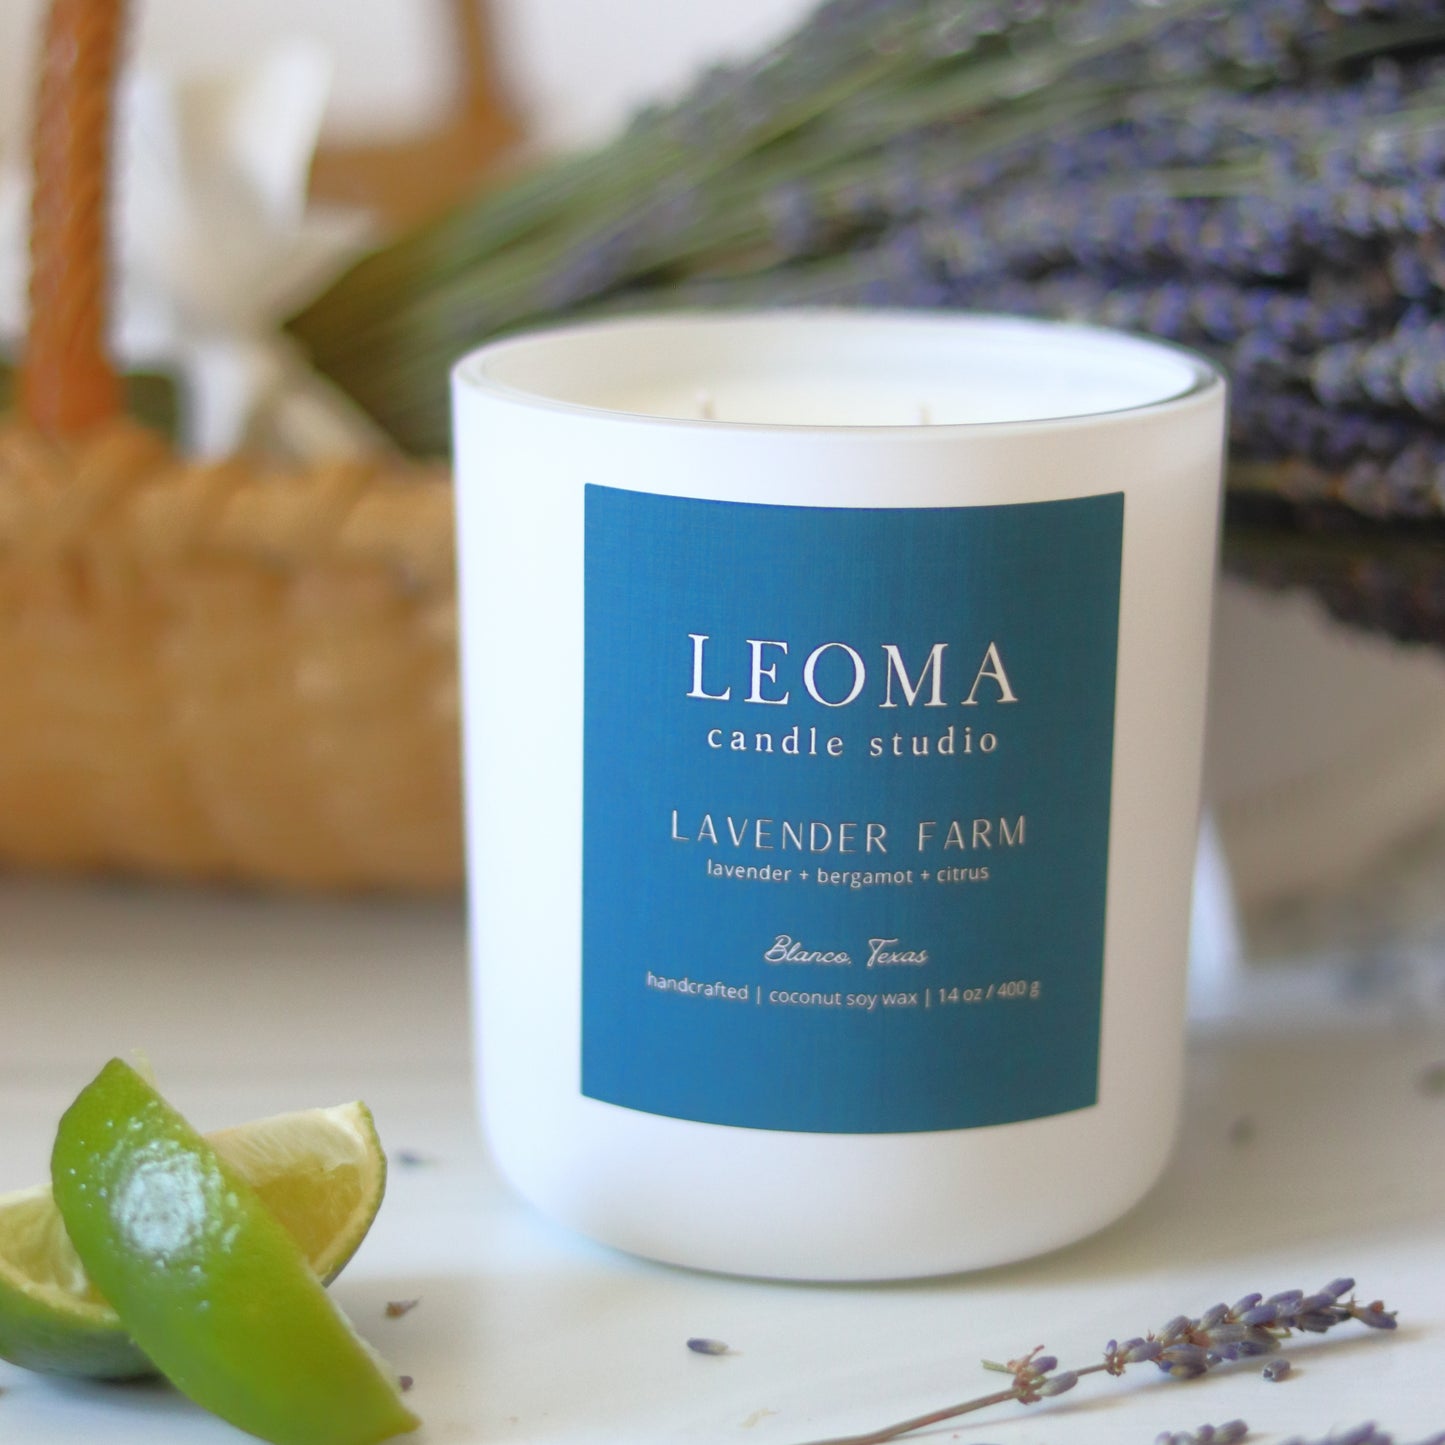 Handcrafted eco-friendly scented candle. Natural coconut & soy wax, toxin-free, 100% cotton wicks. White vessel. Lavender Farm classic scented.